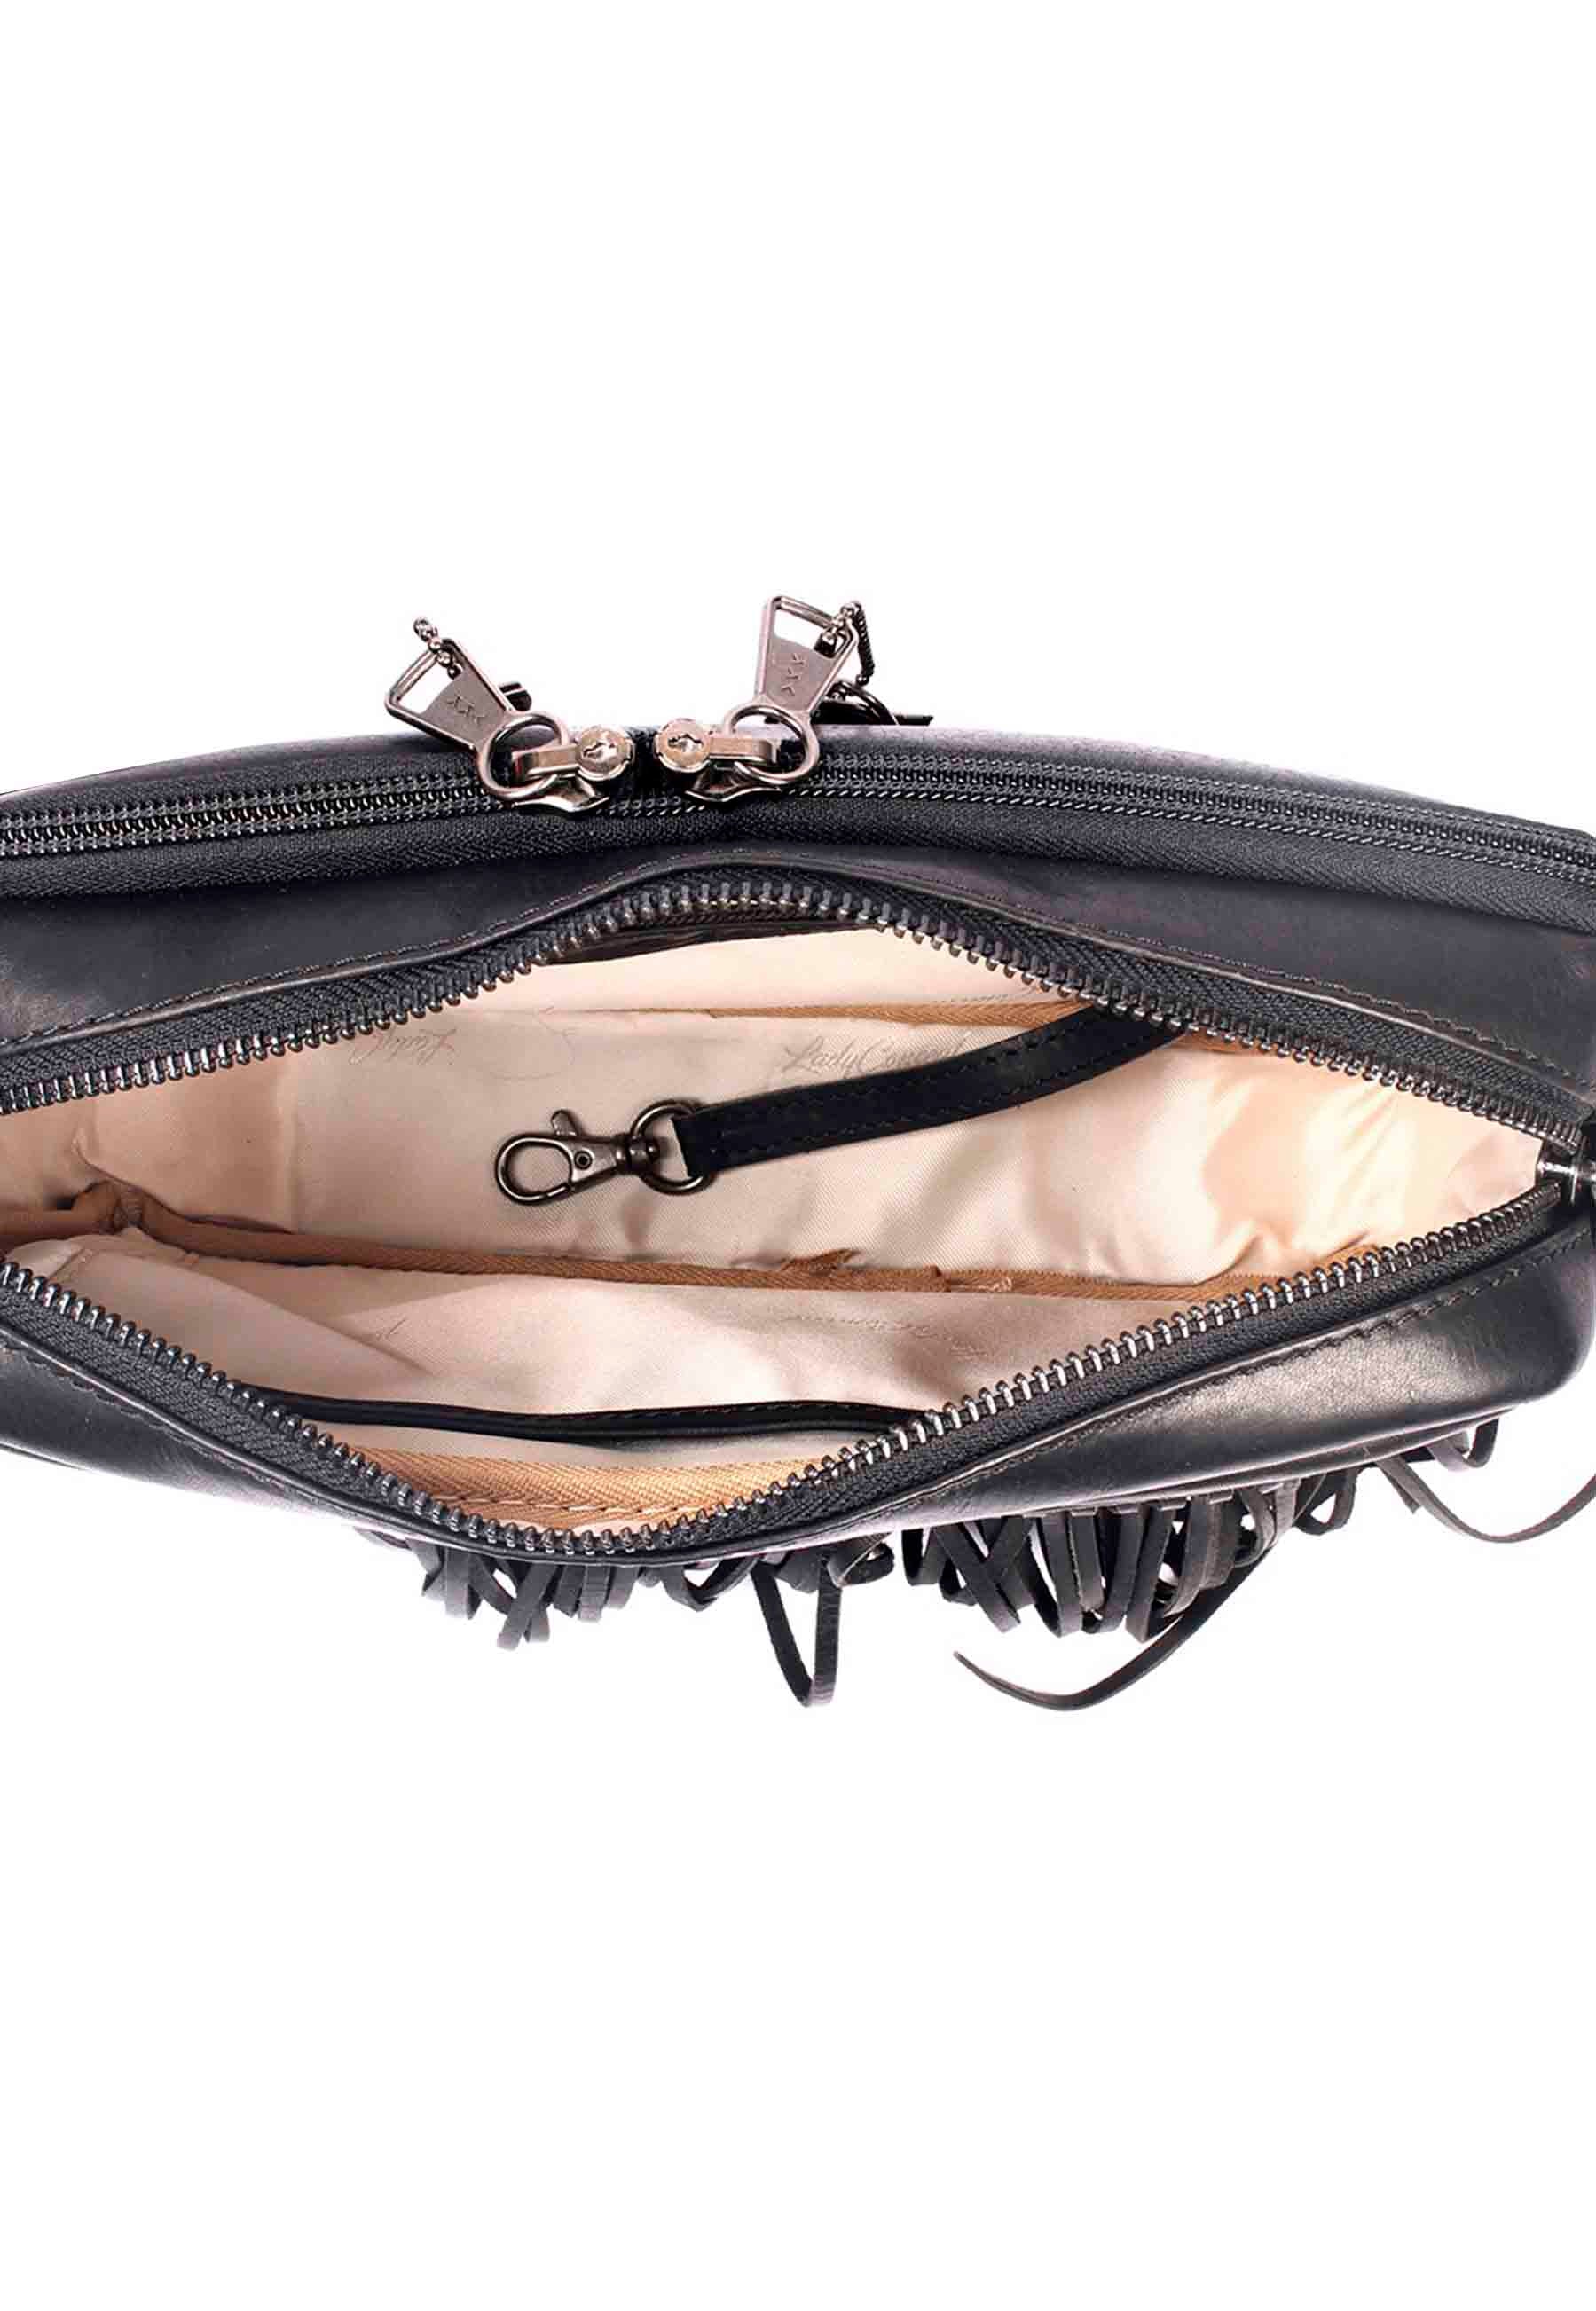 interior pocket view of high end conceal carry purse in black leather